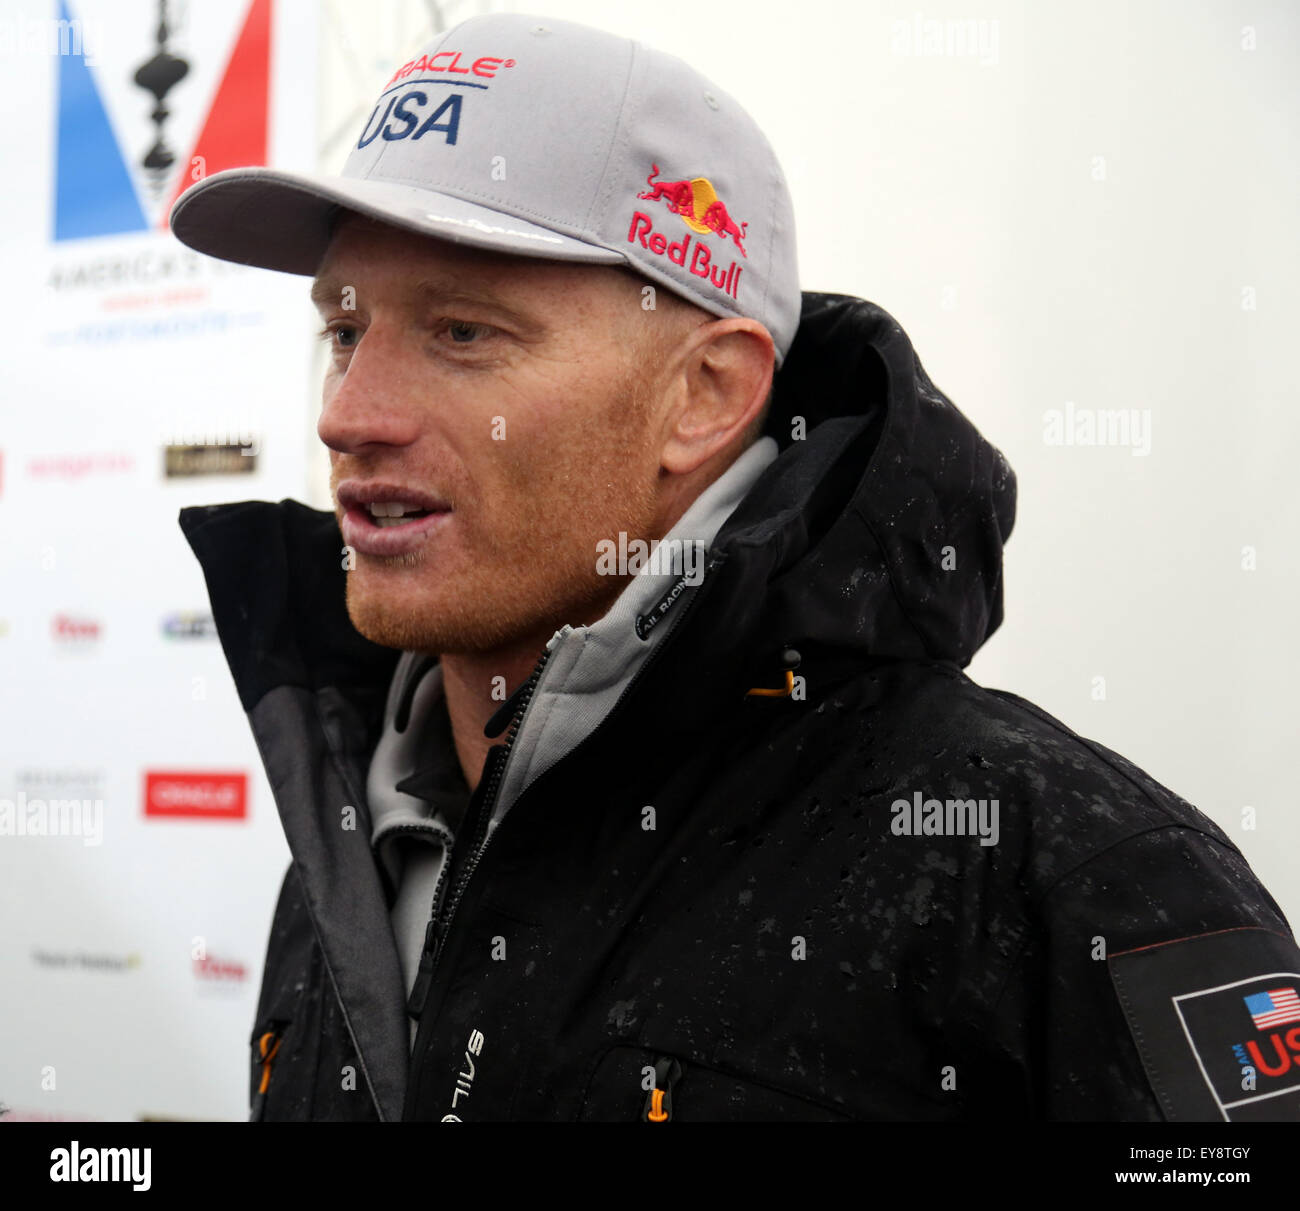 Southsea, Hampshire, Royaume-Uni. 24 juillet, 2015. America's cup. Photo : Équipe d'Oracle USA Skipper Jimmy Spithill. Credit : uknip/ Alamy Live News Banque D'Images